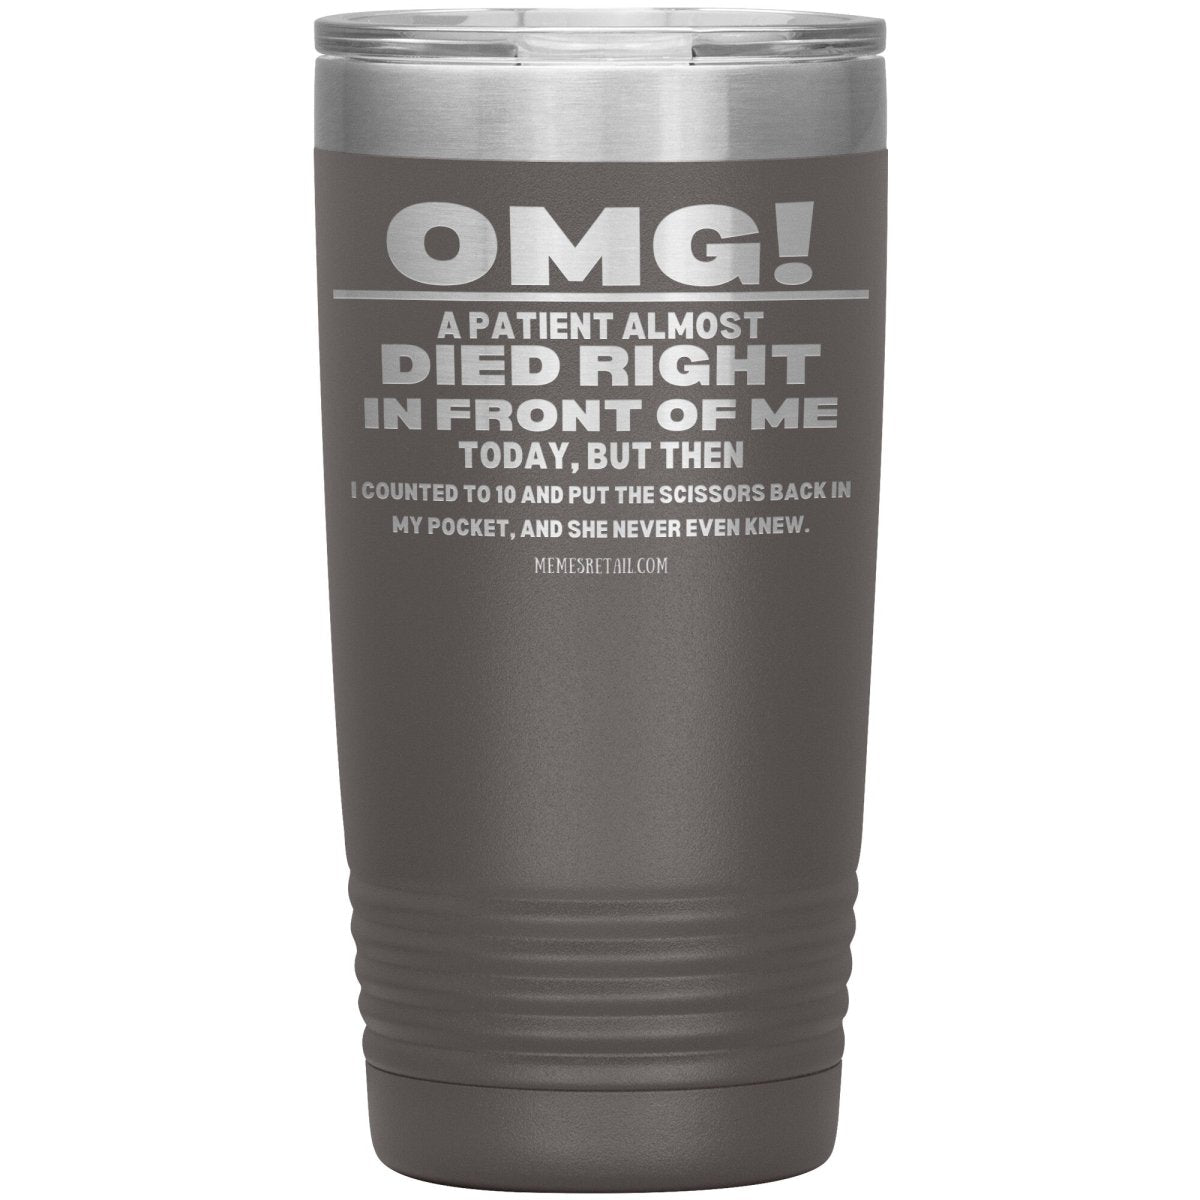 OMG! A Patient Almost Died Today Tumblers, 20oz Insulated Tumbler / Pewter - MemesRetail.com